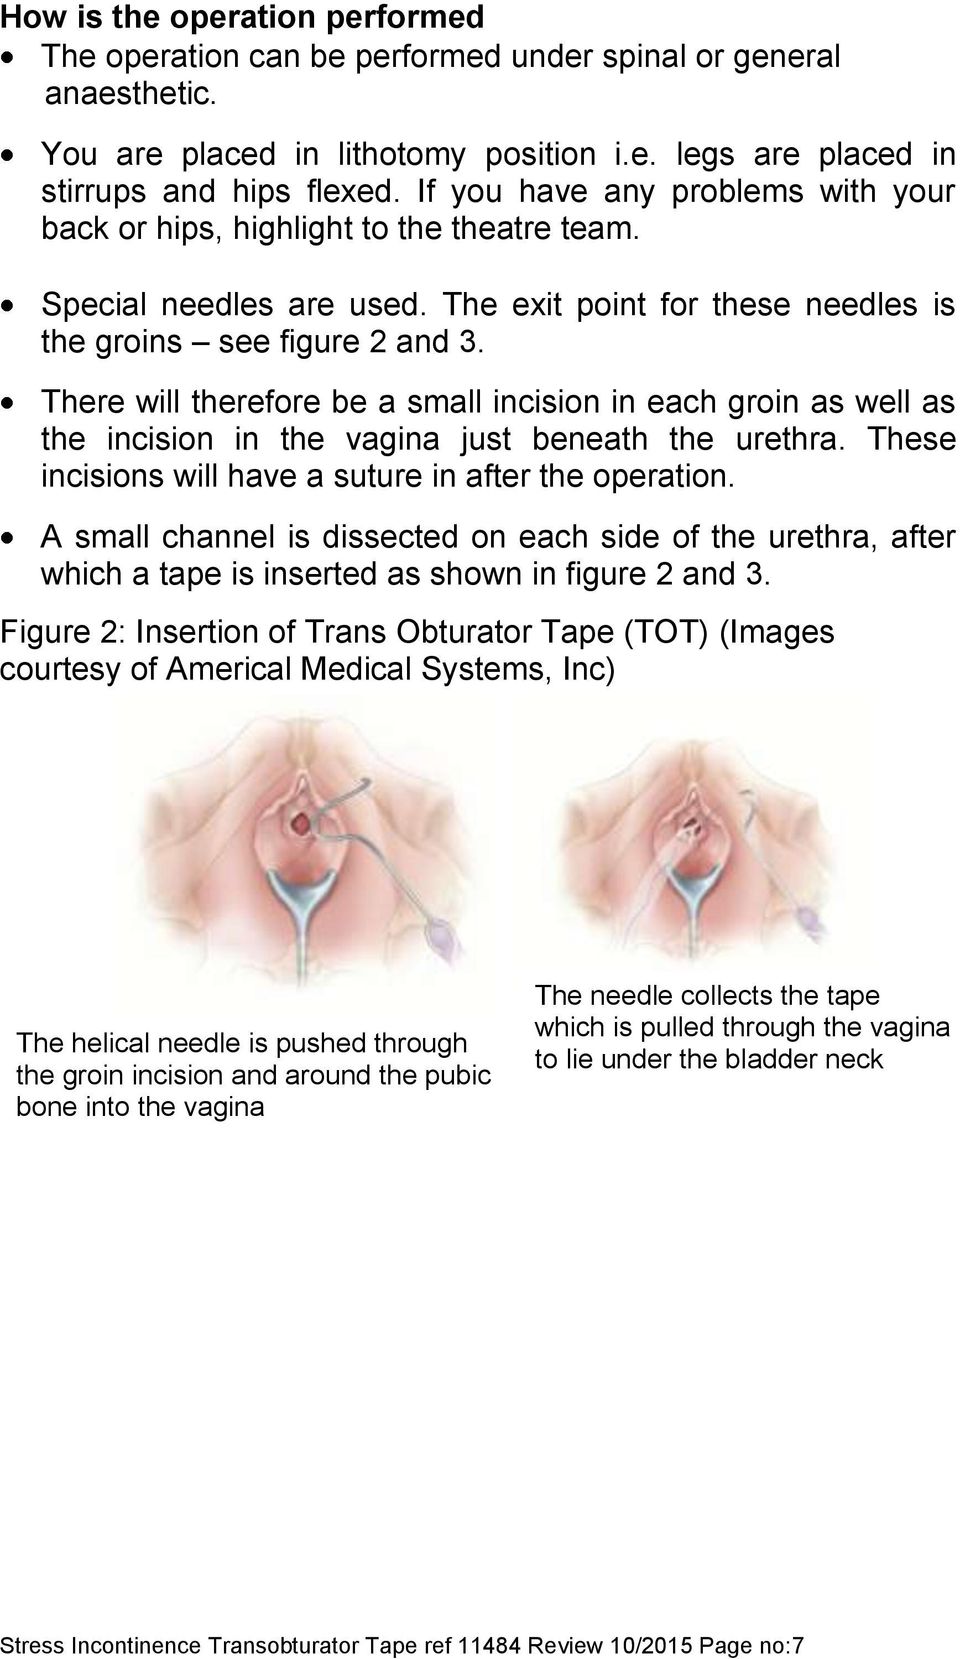 There will therefore be a small incision in each groin as well as the incision in the vagina just beneath the urethra. These incisions will have a suture in after the operation.